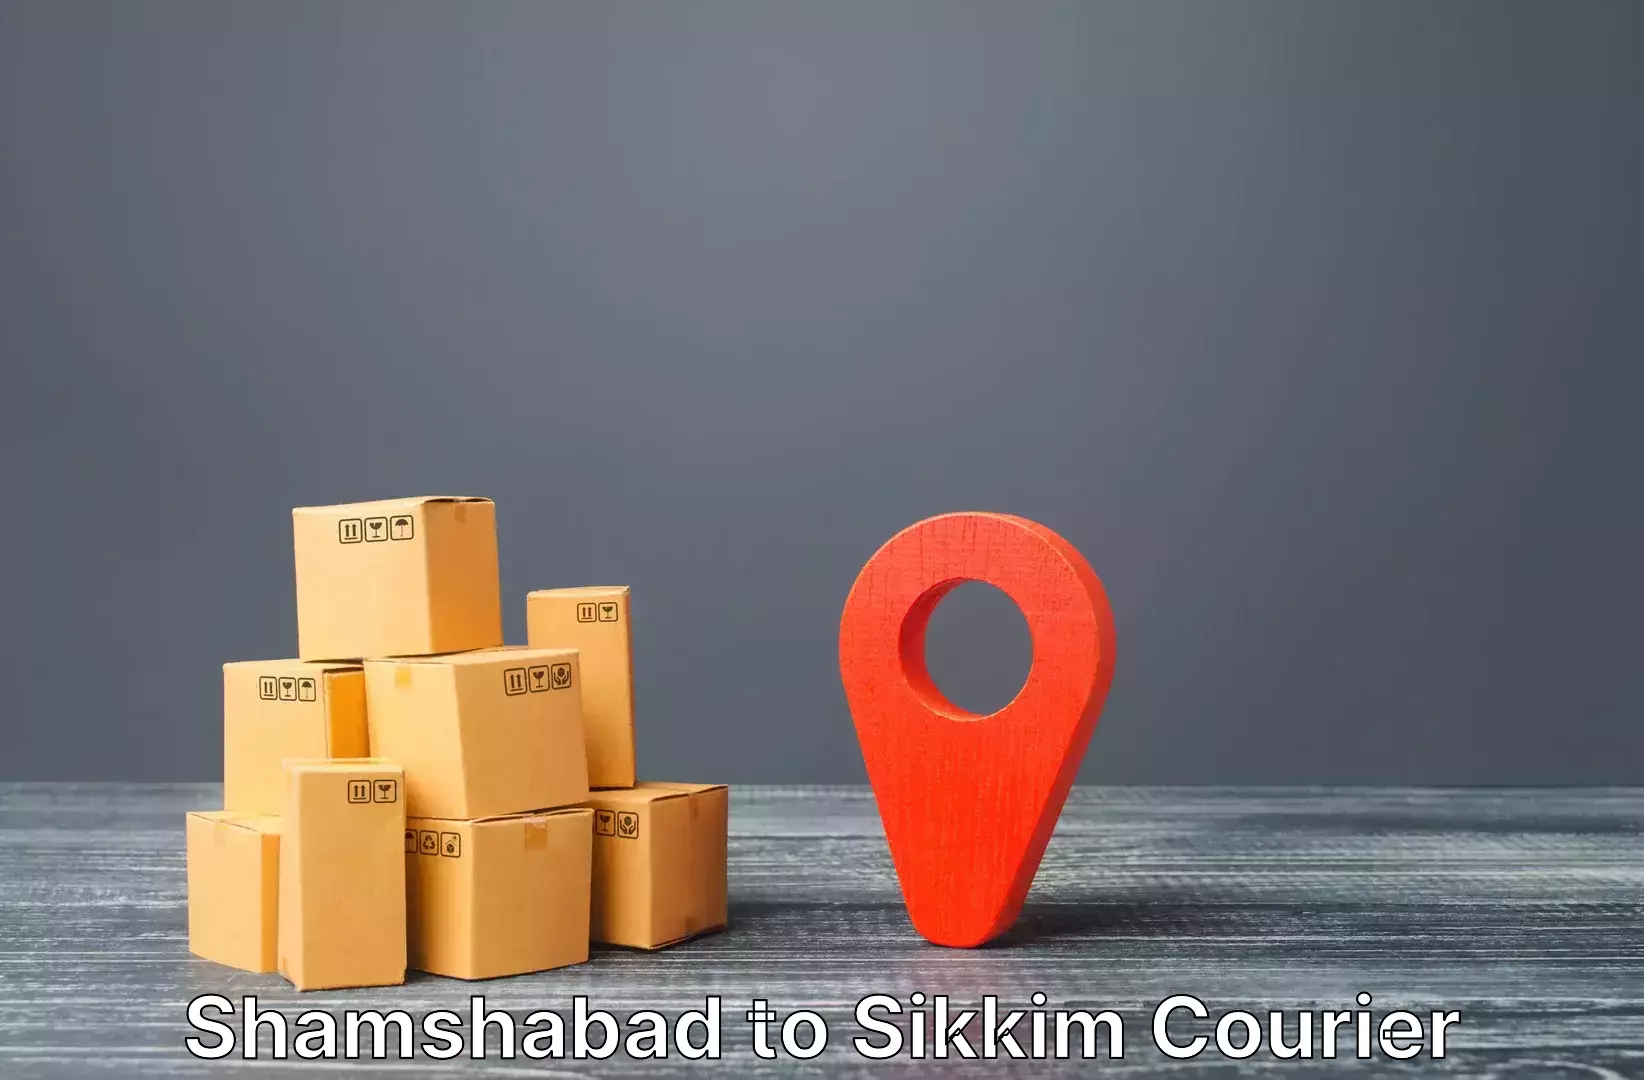 Luggage delivery providers Shamshabad to East Sikkim